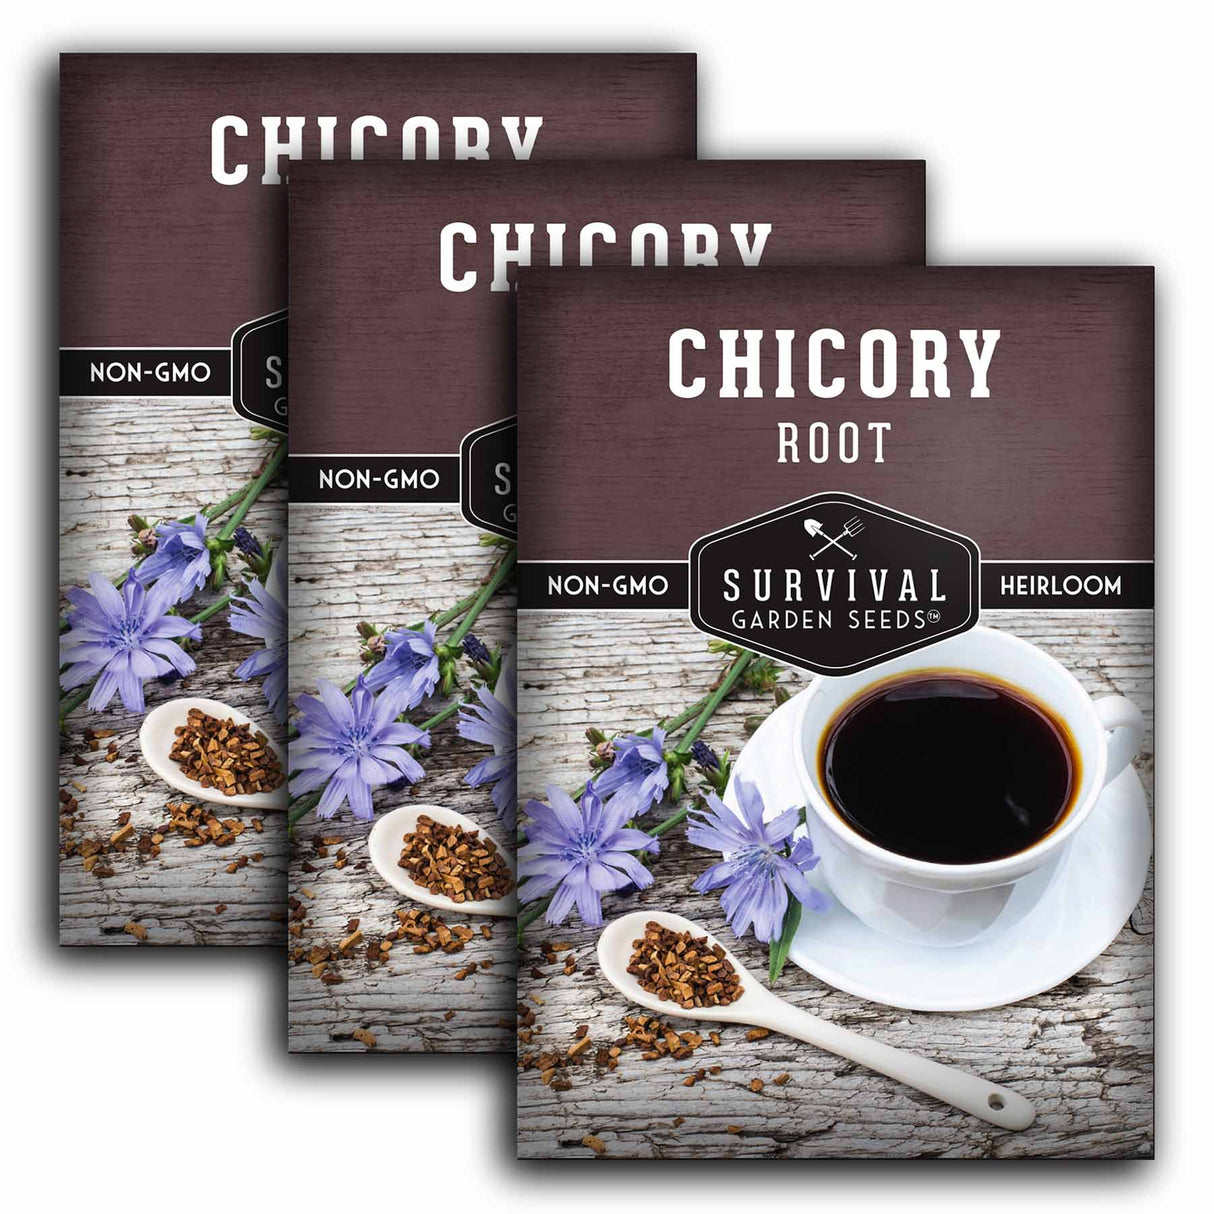 3 packets of Root Chicory seeds